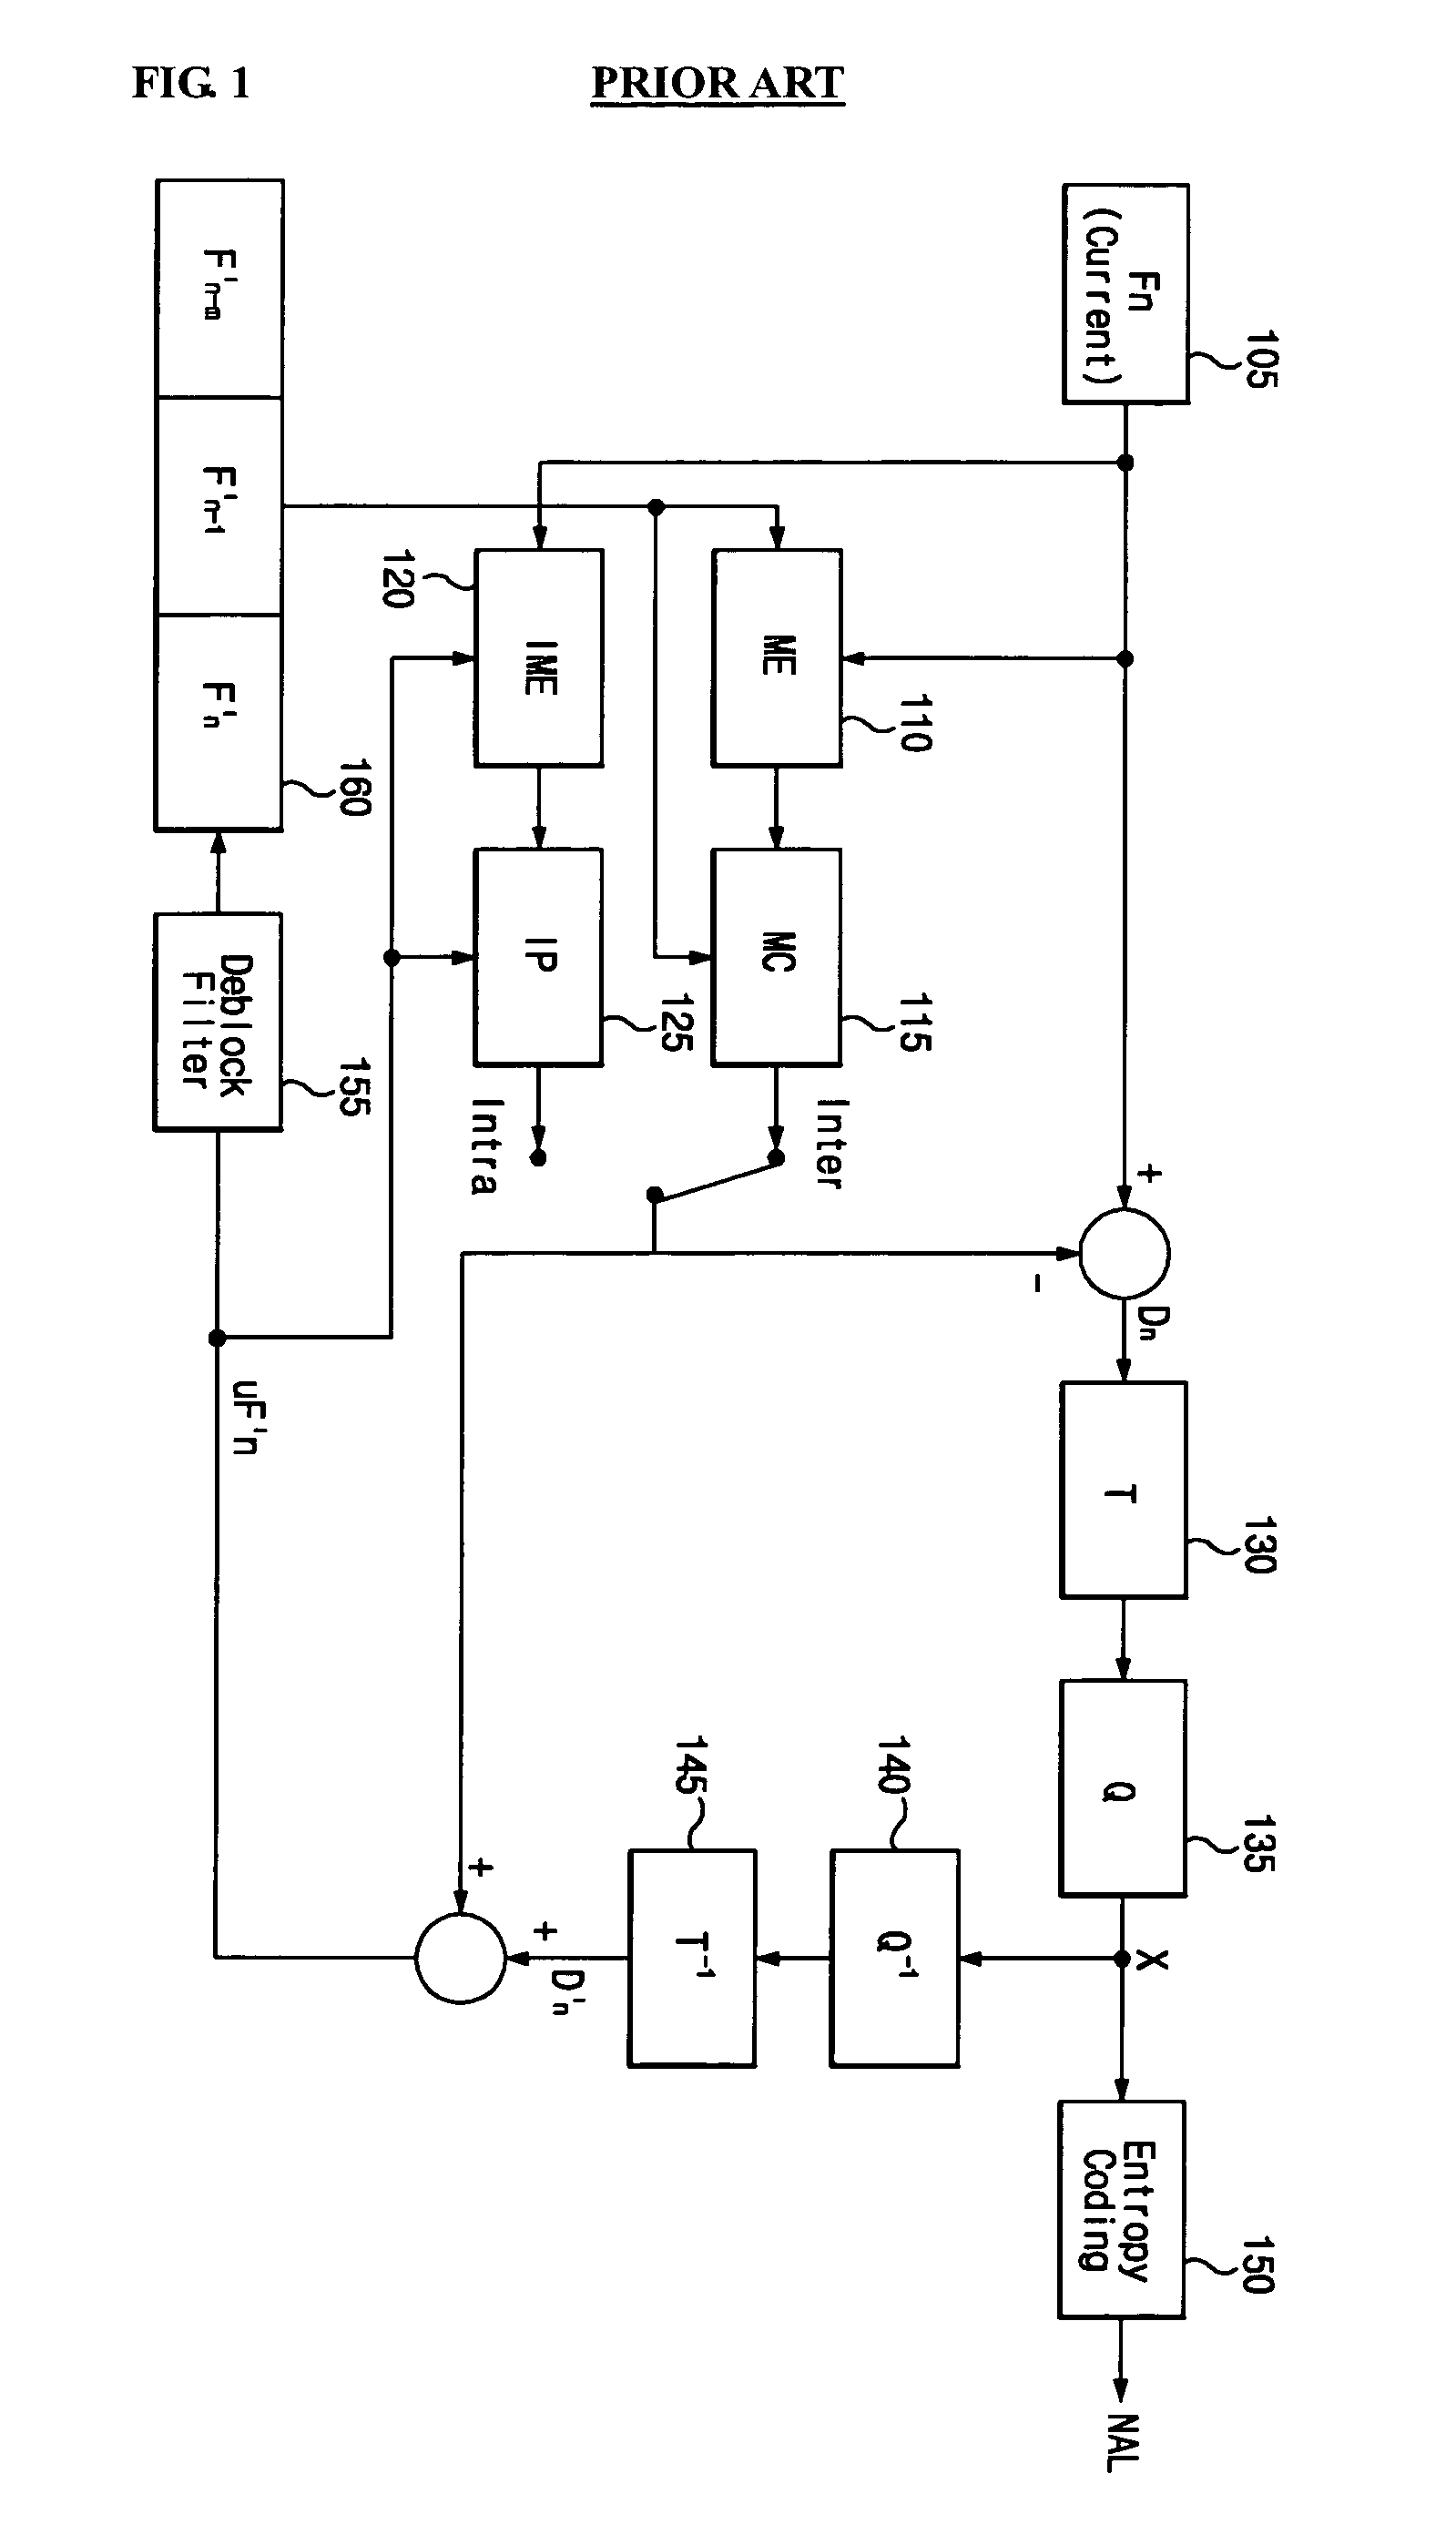 Adaptive motion estimation and mode decision apparatus and method for H.264 video codec